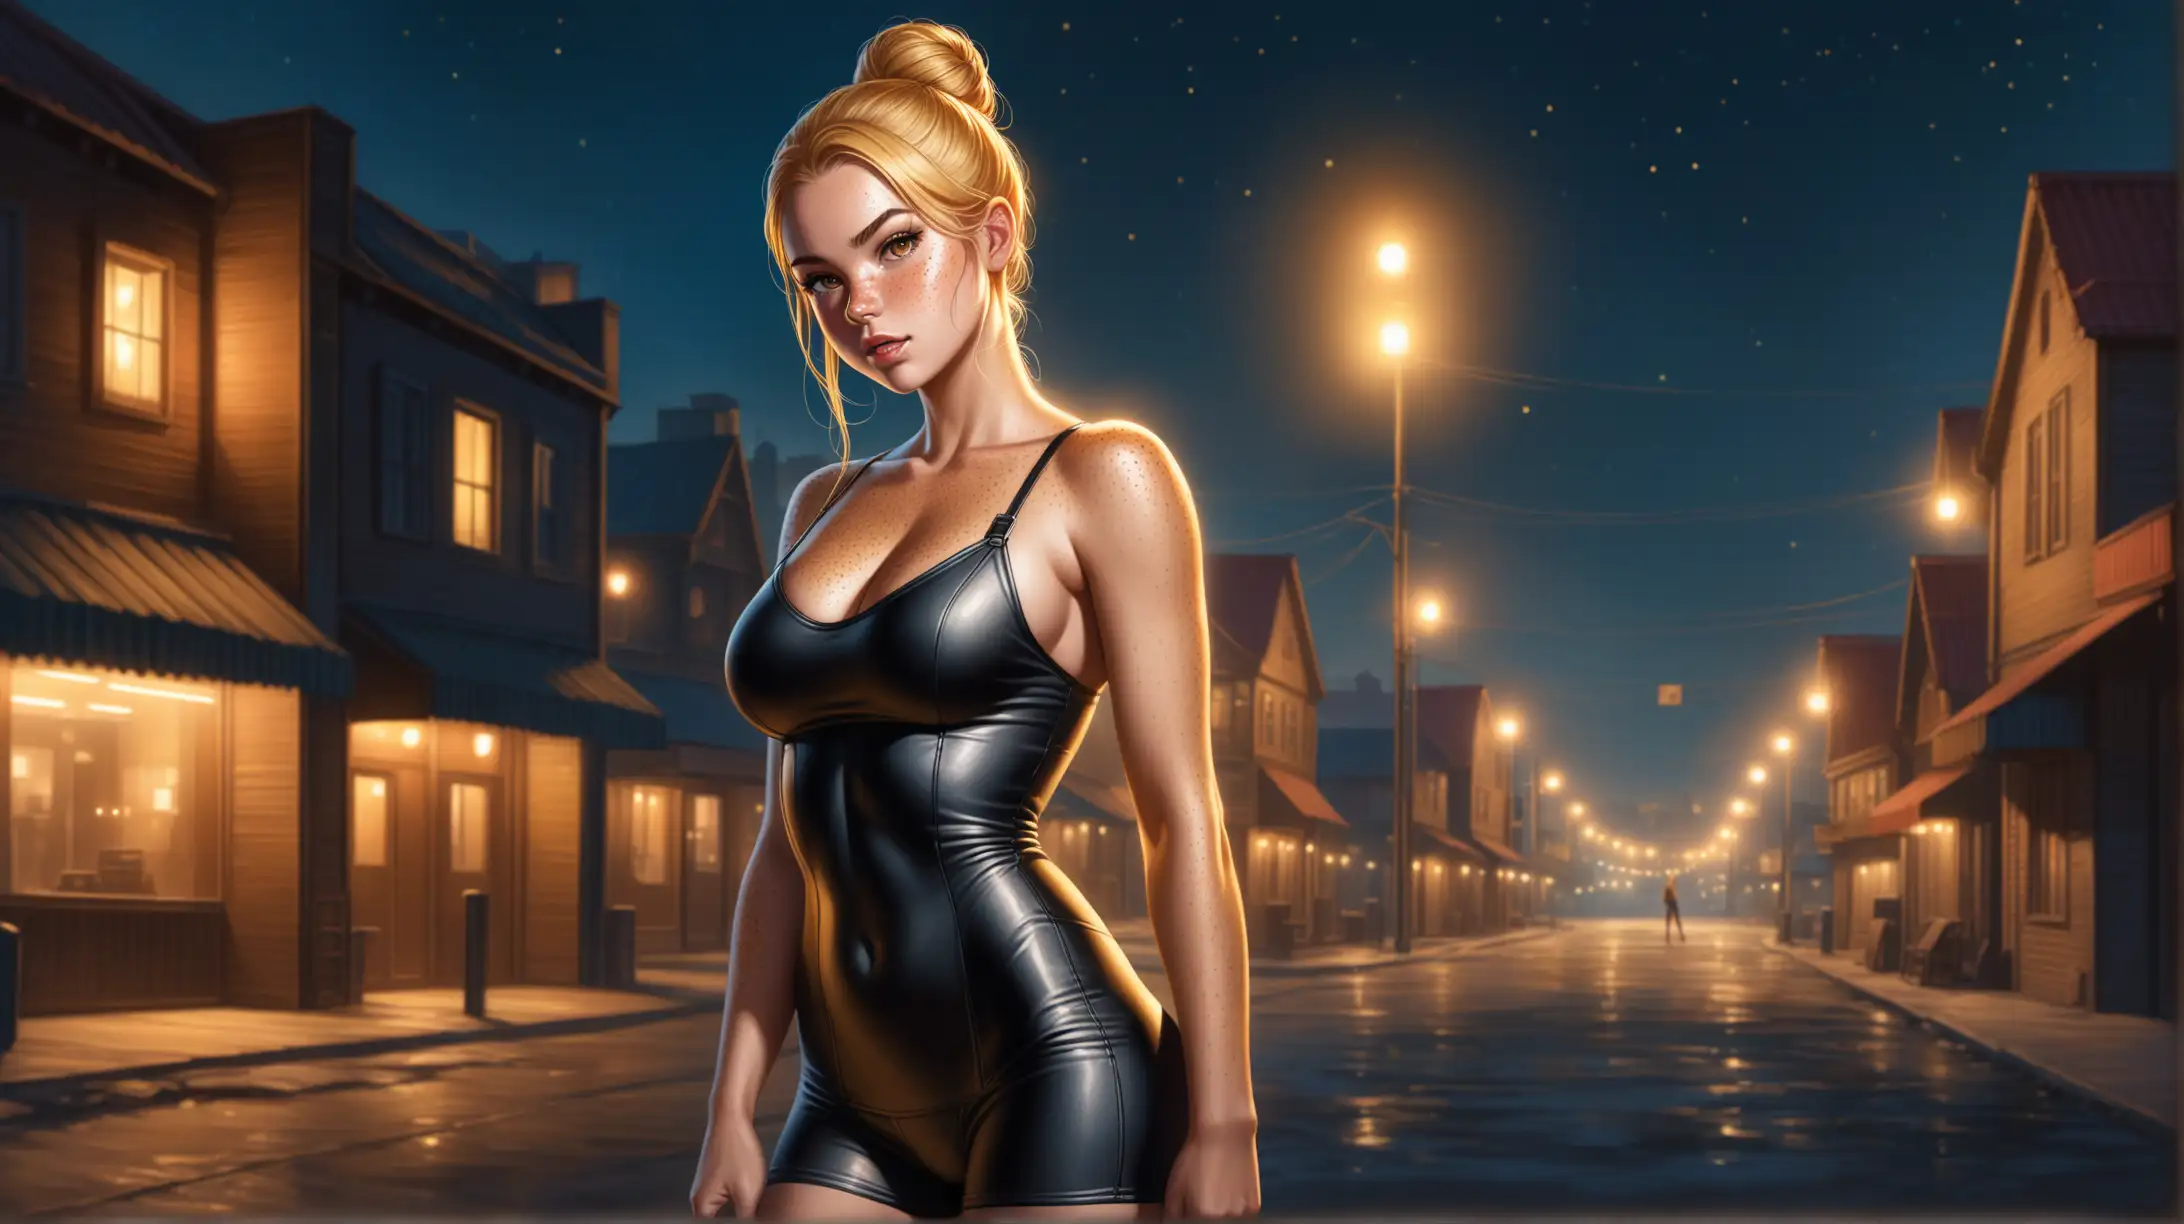 Woman with Blonde Hair and Gold Eyes in FalloutInspired Outfit at Night in Town